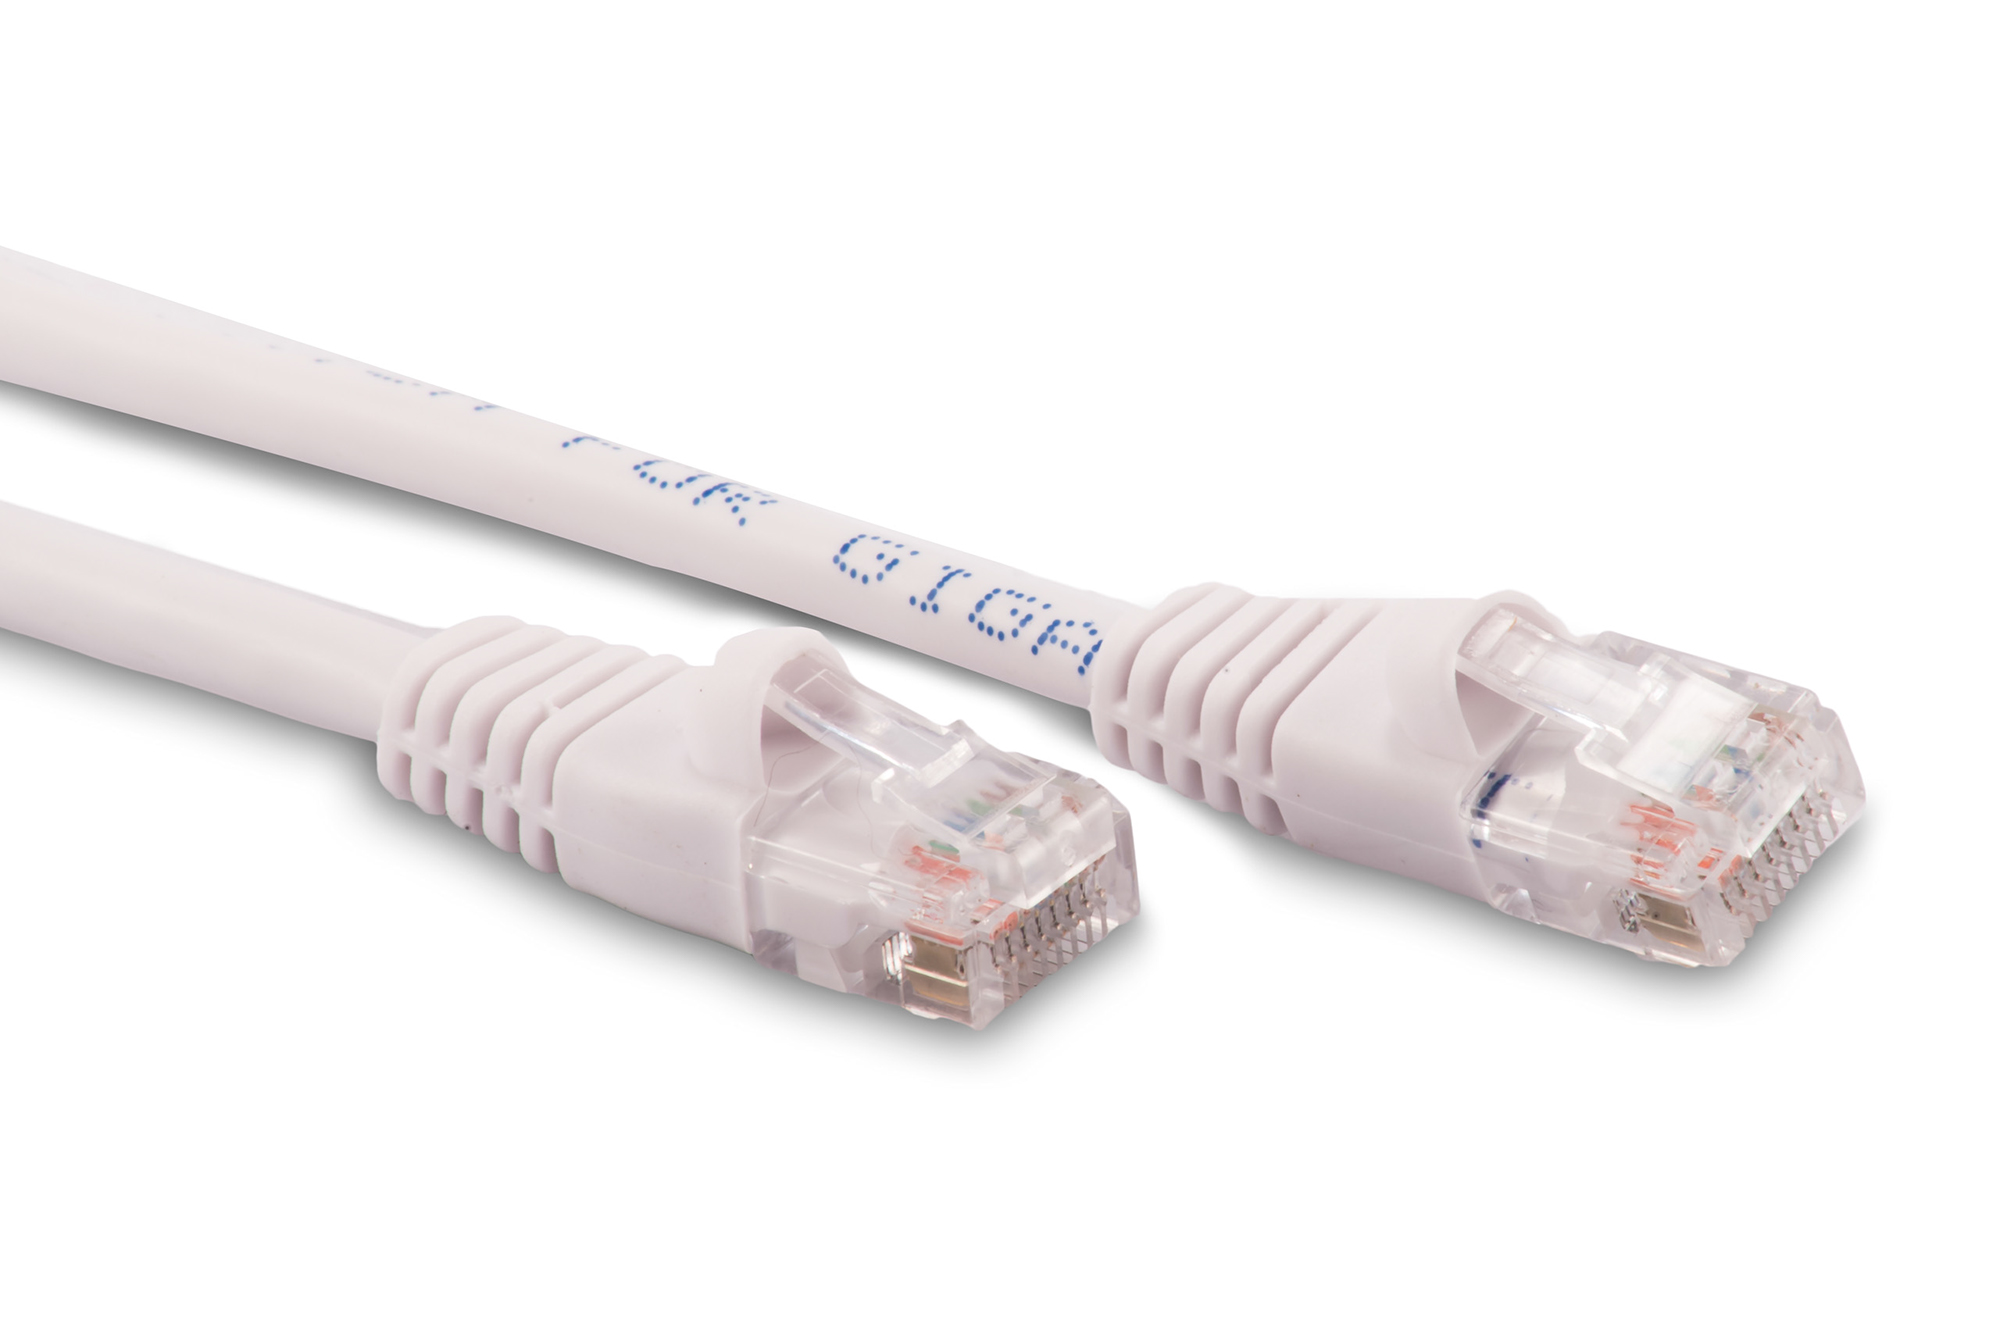 25ft Cat5e Ethernet Patch Cable - White Color - Snagless Boot, Stranded, RJ45, 350Mhz, 24AWG